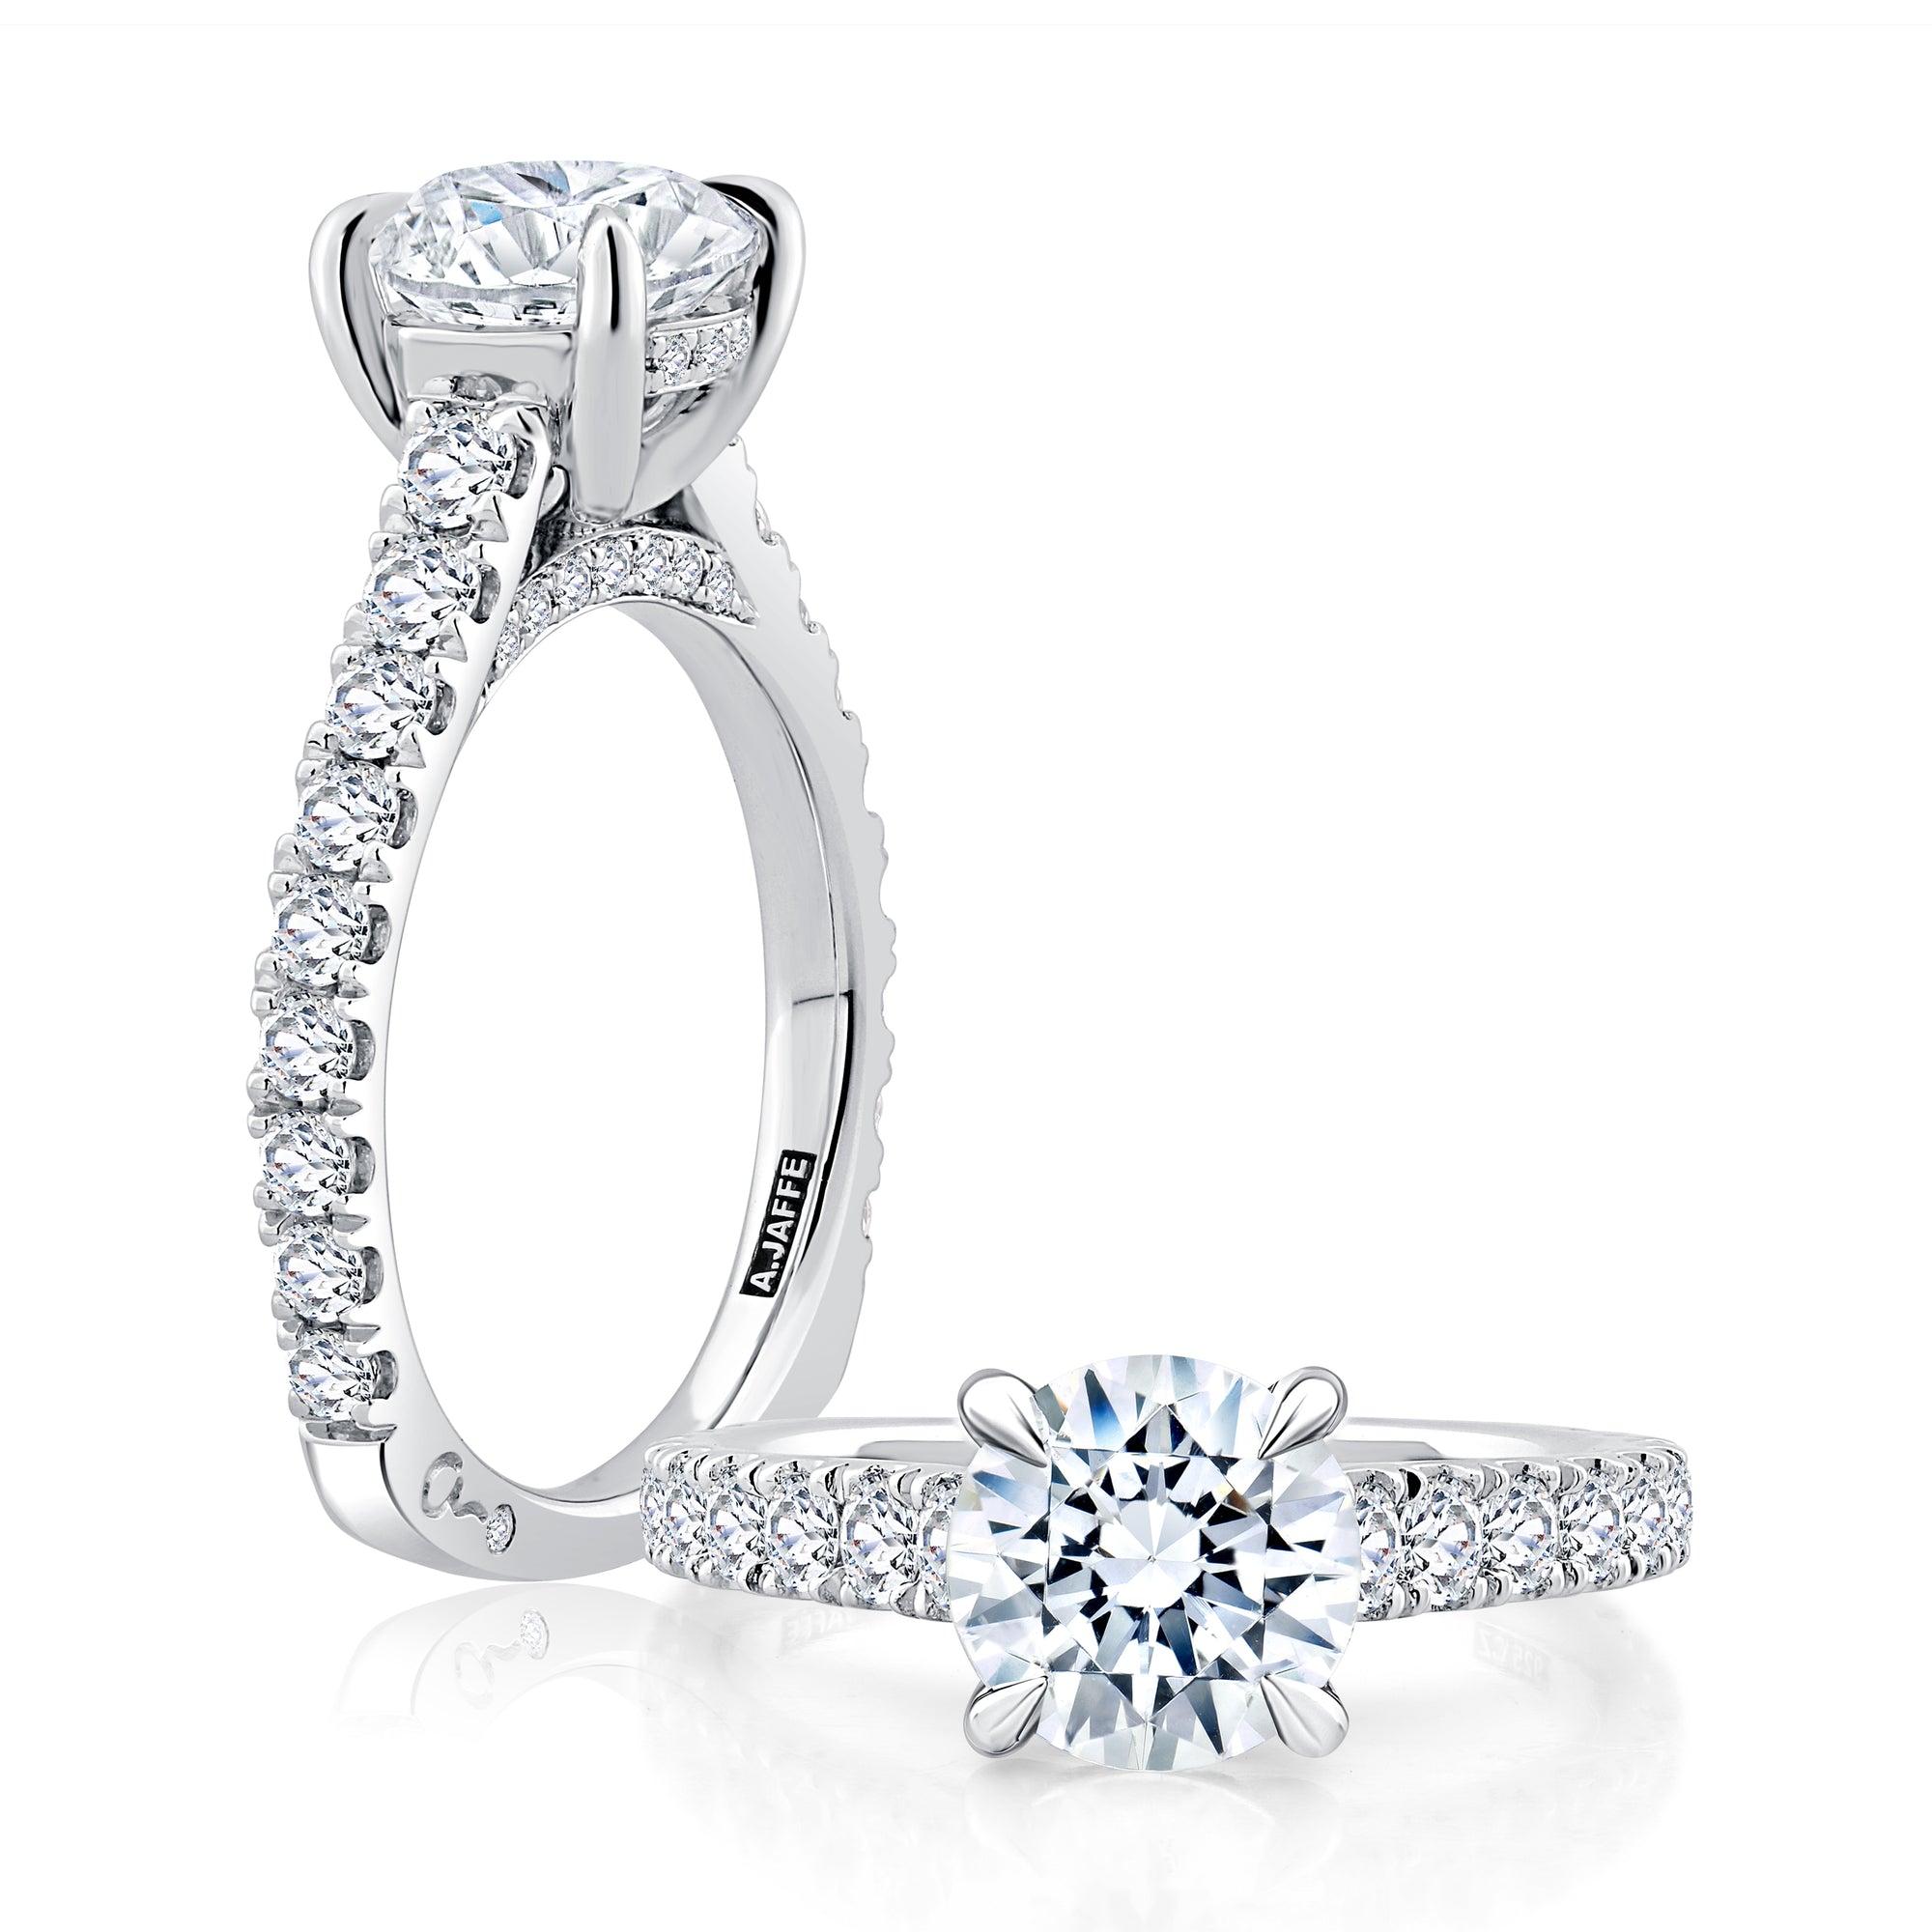 A.Jaffe Signature Diamond Peek-A-Boo Halo with Gallery Accent Engagement Ring MESRD2774/232